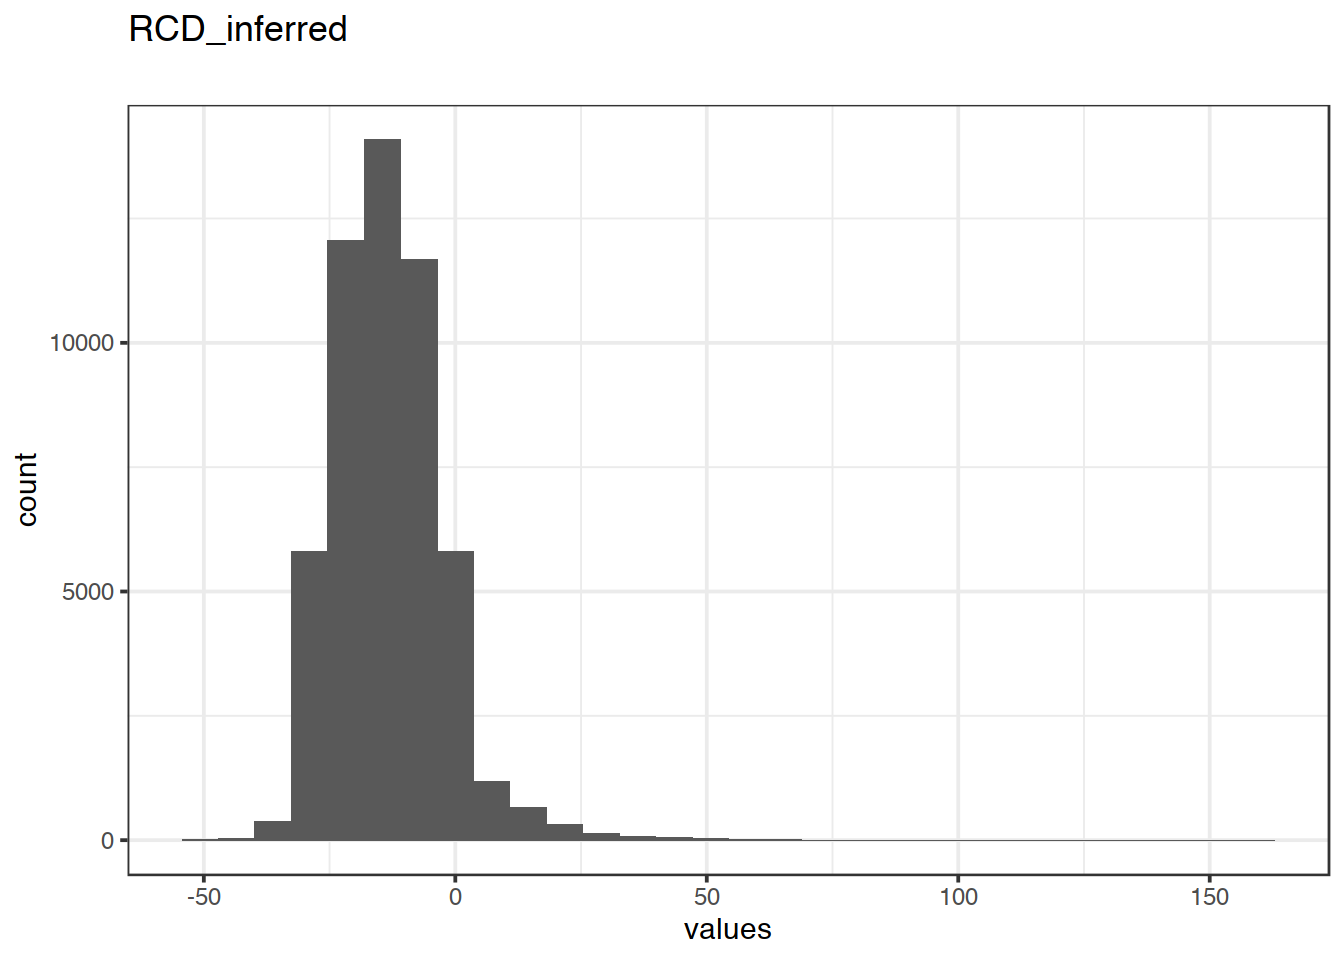 Distribution of values for RCD_inferred